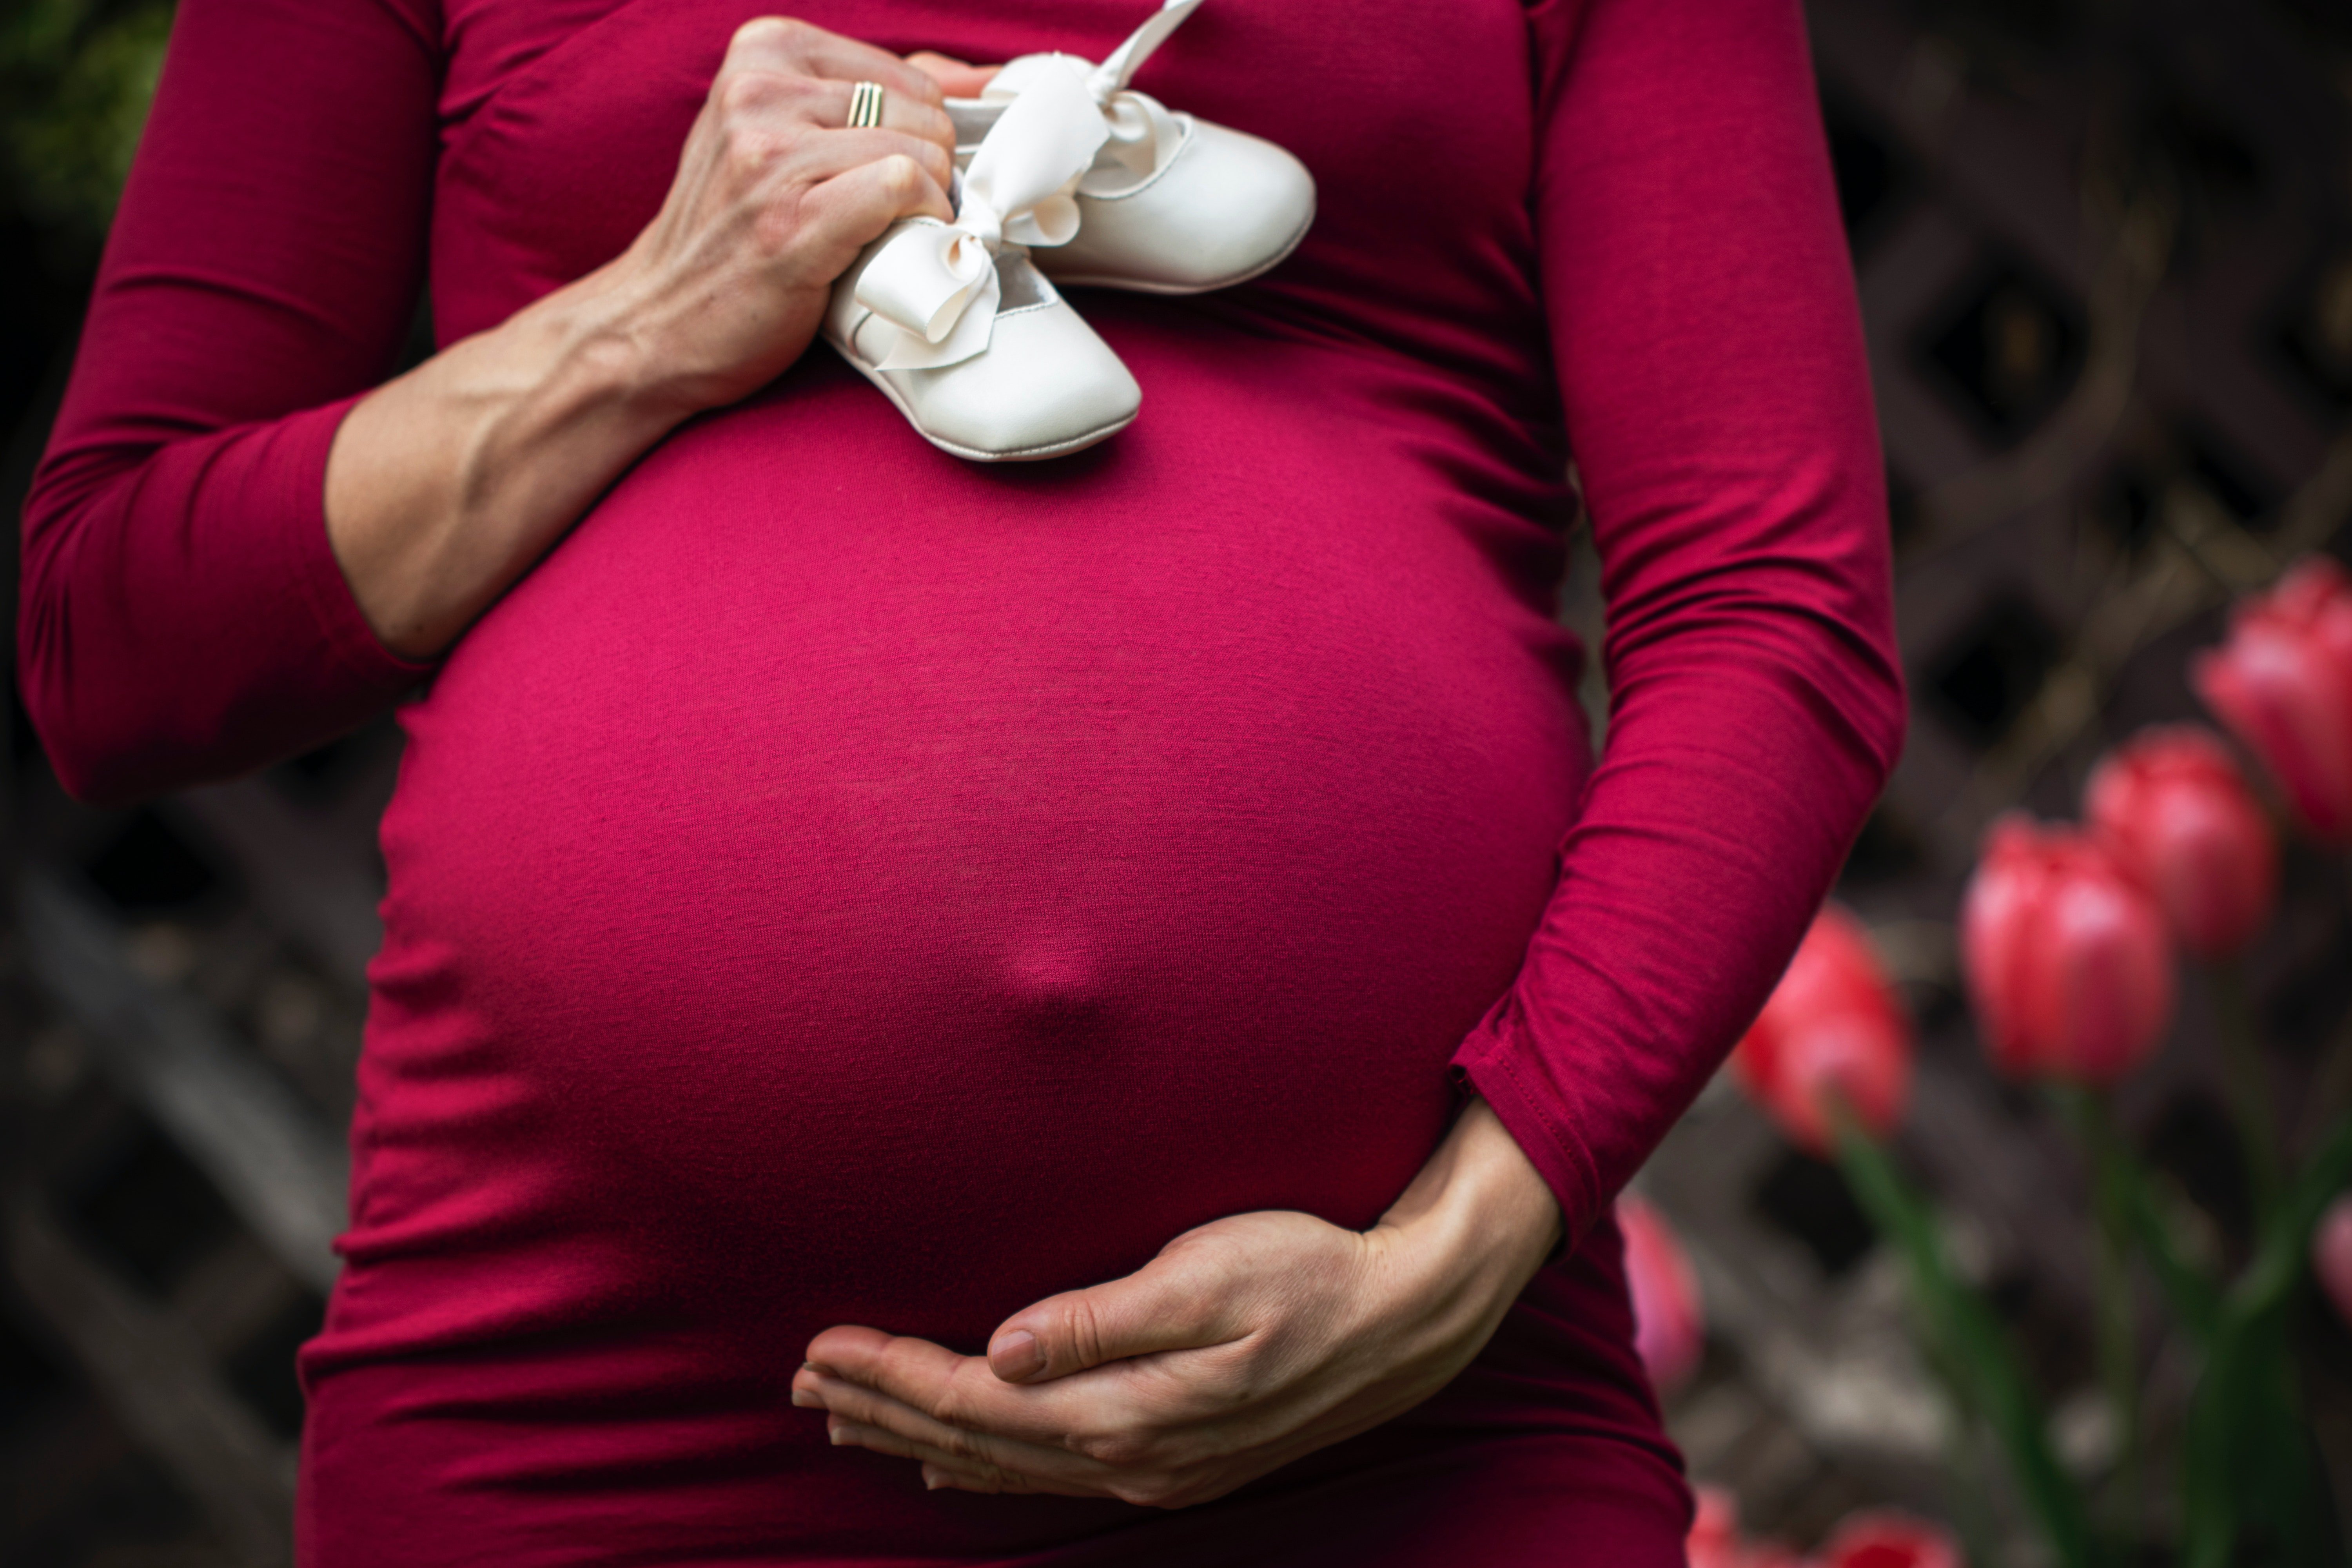 Pregnant woman holding baby's shoes. | Source: Pexels